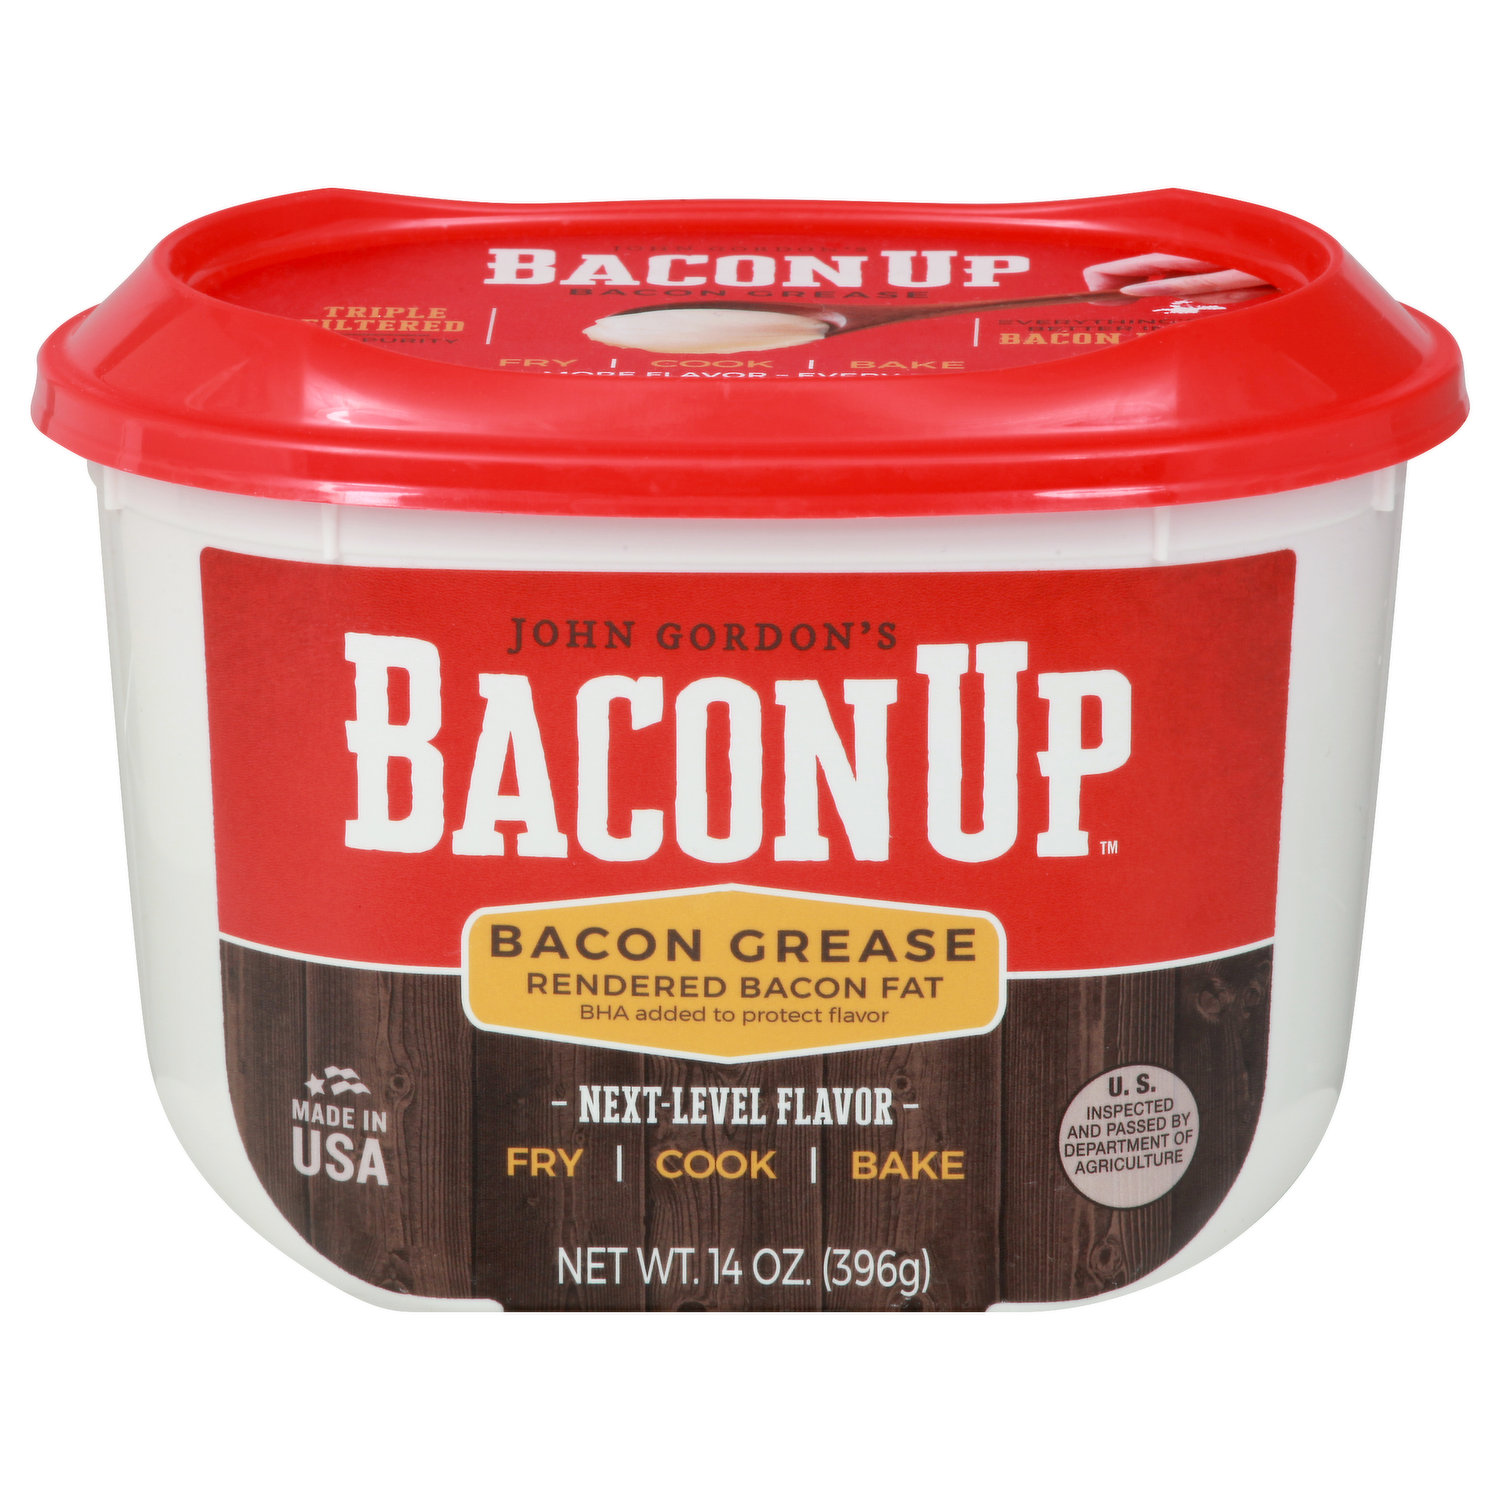 BaconUp